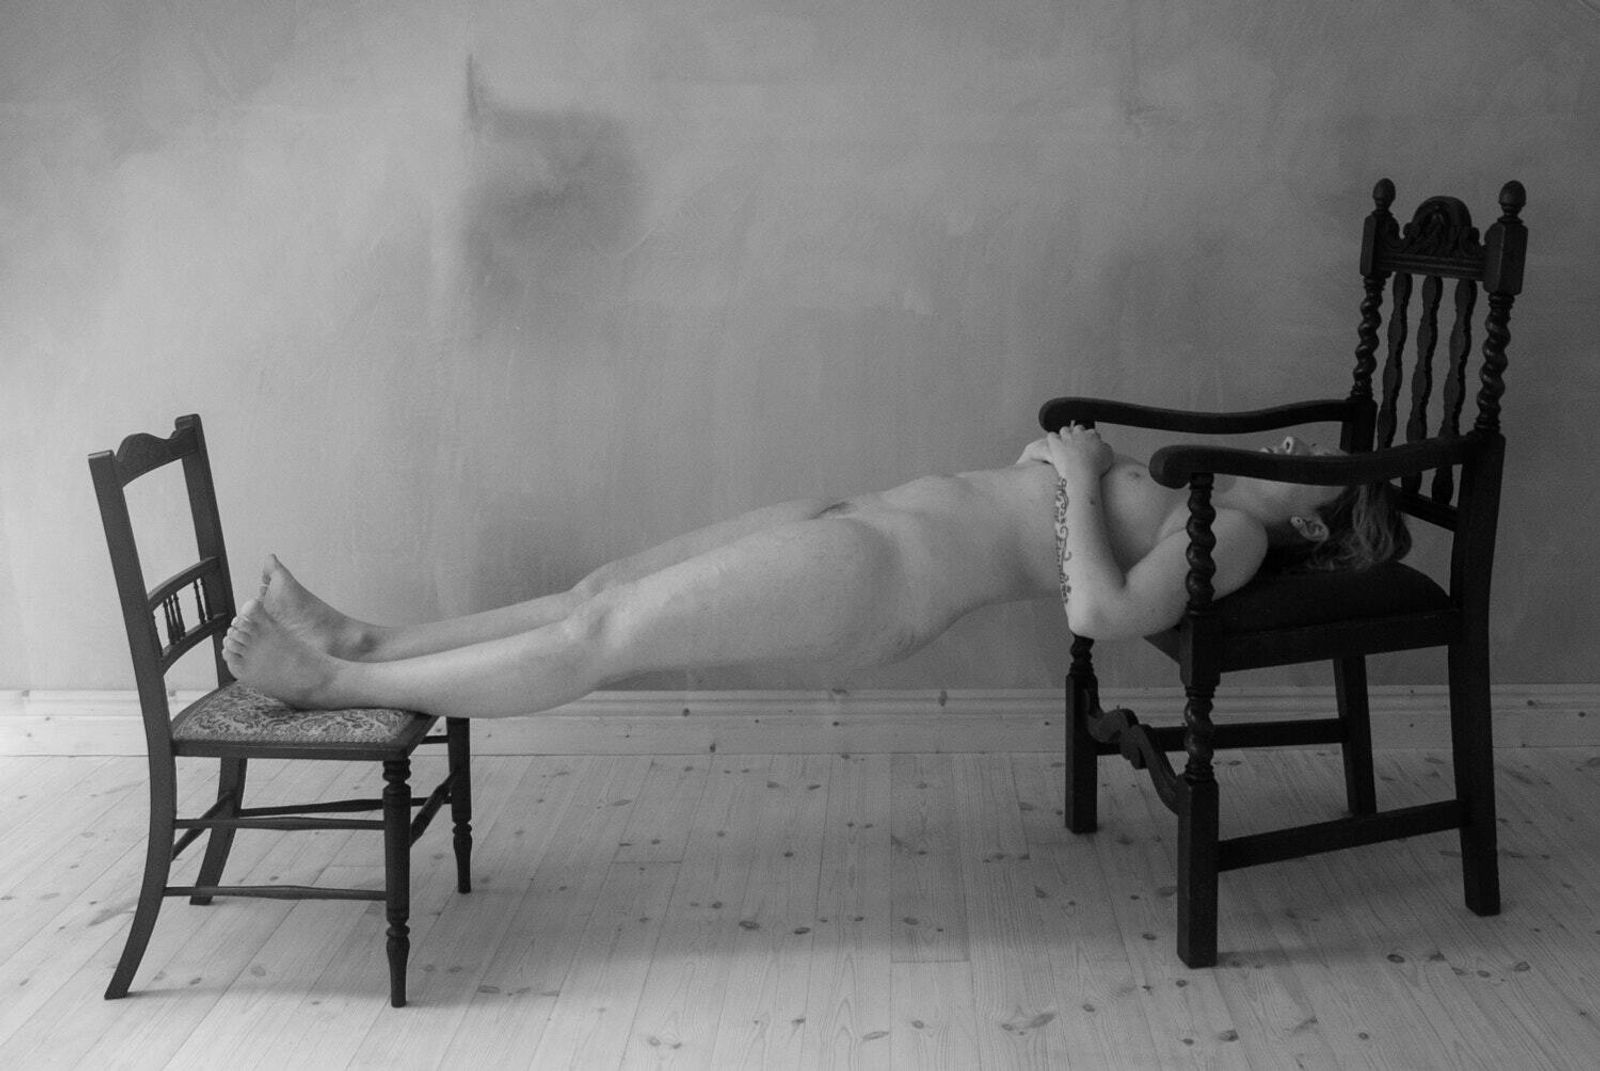 © Roisin White, from the series Lay Her Down Upon Her Back